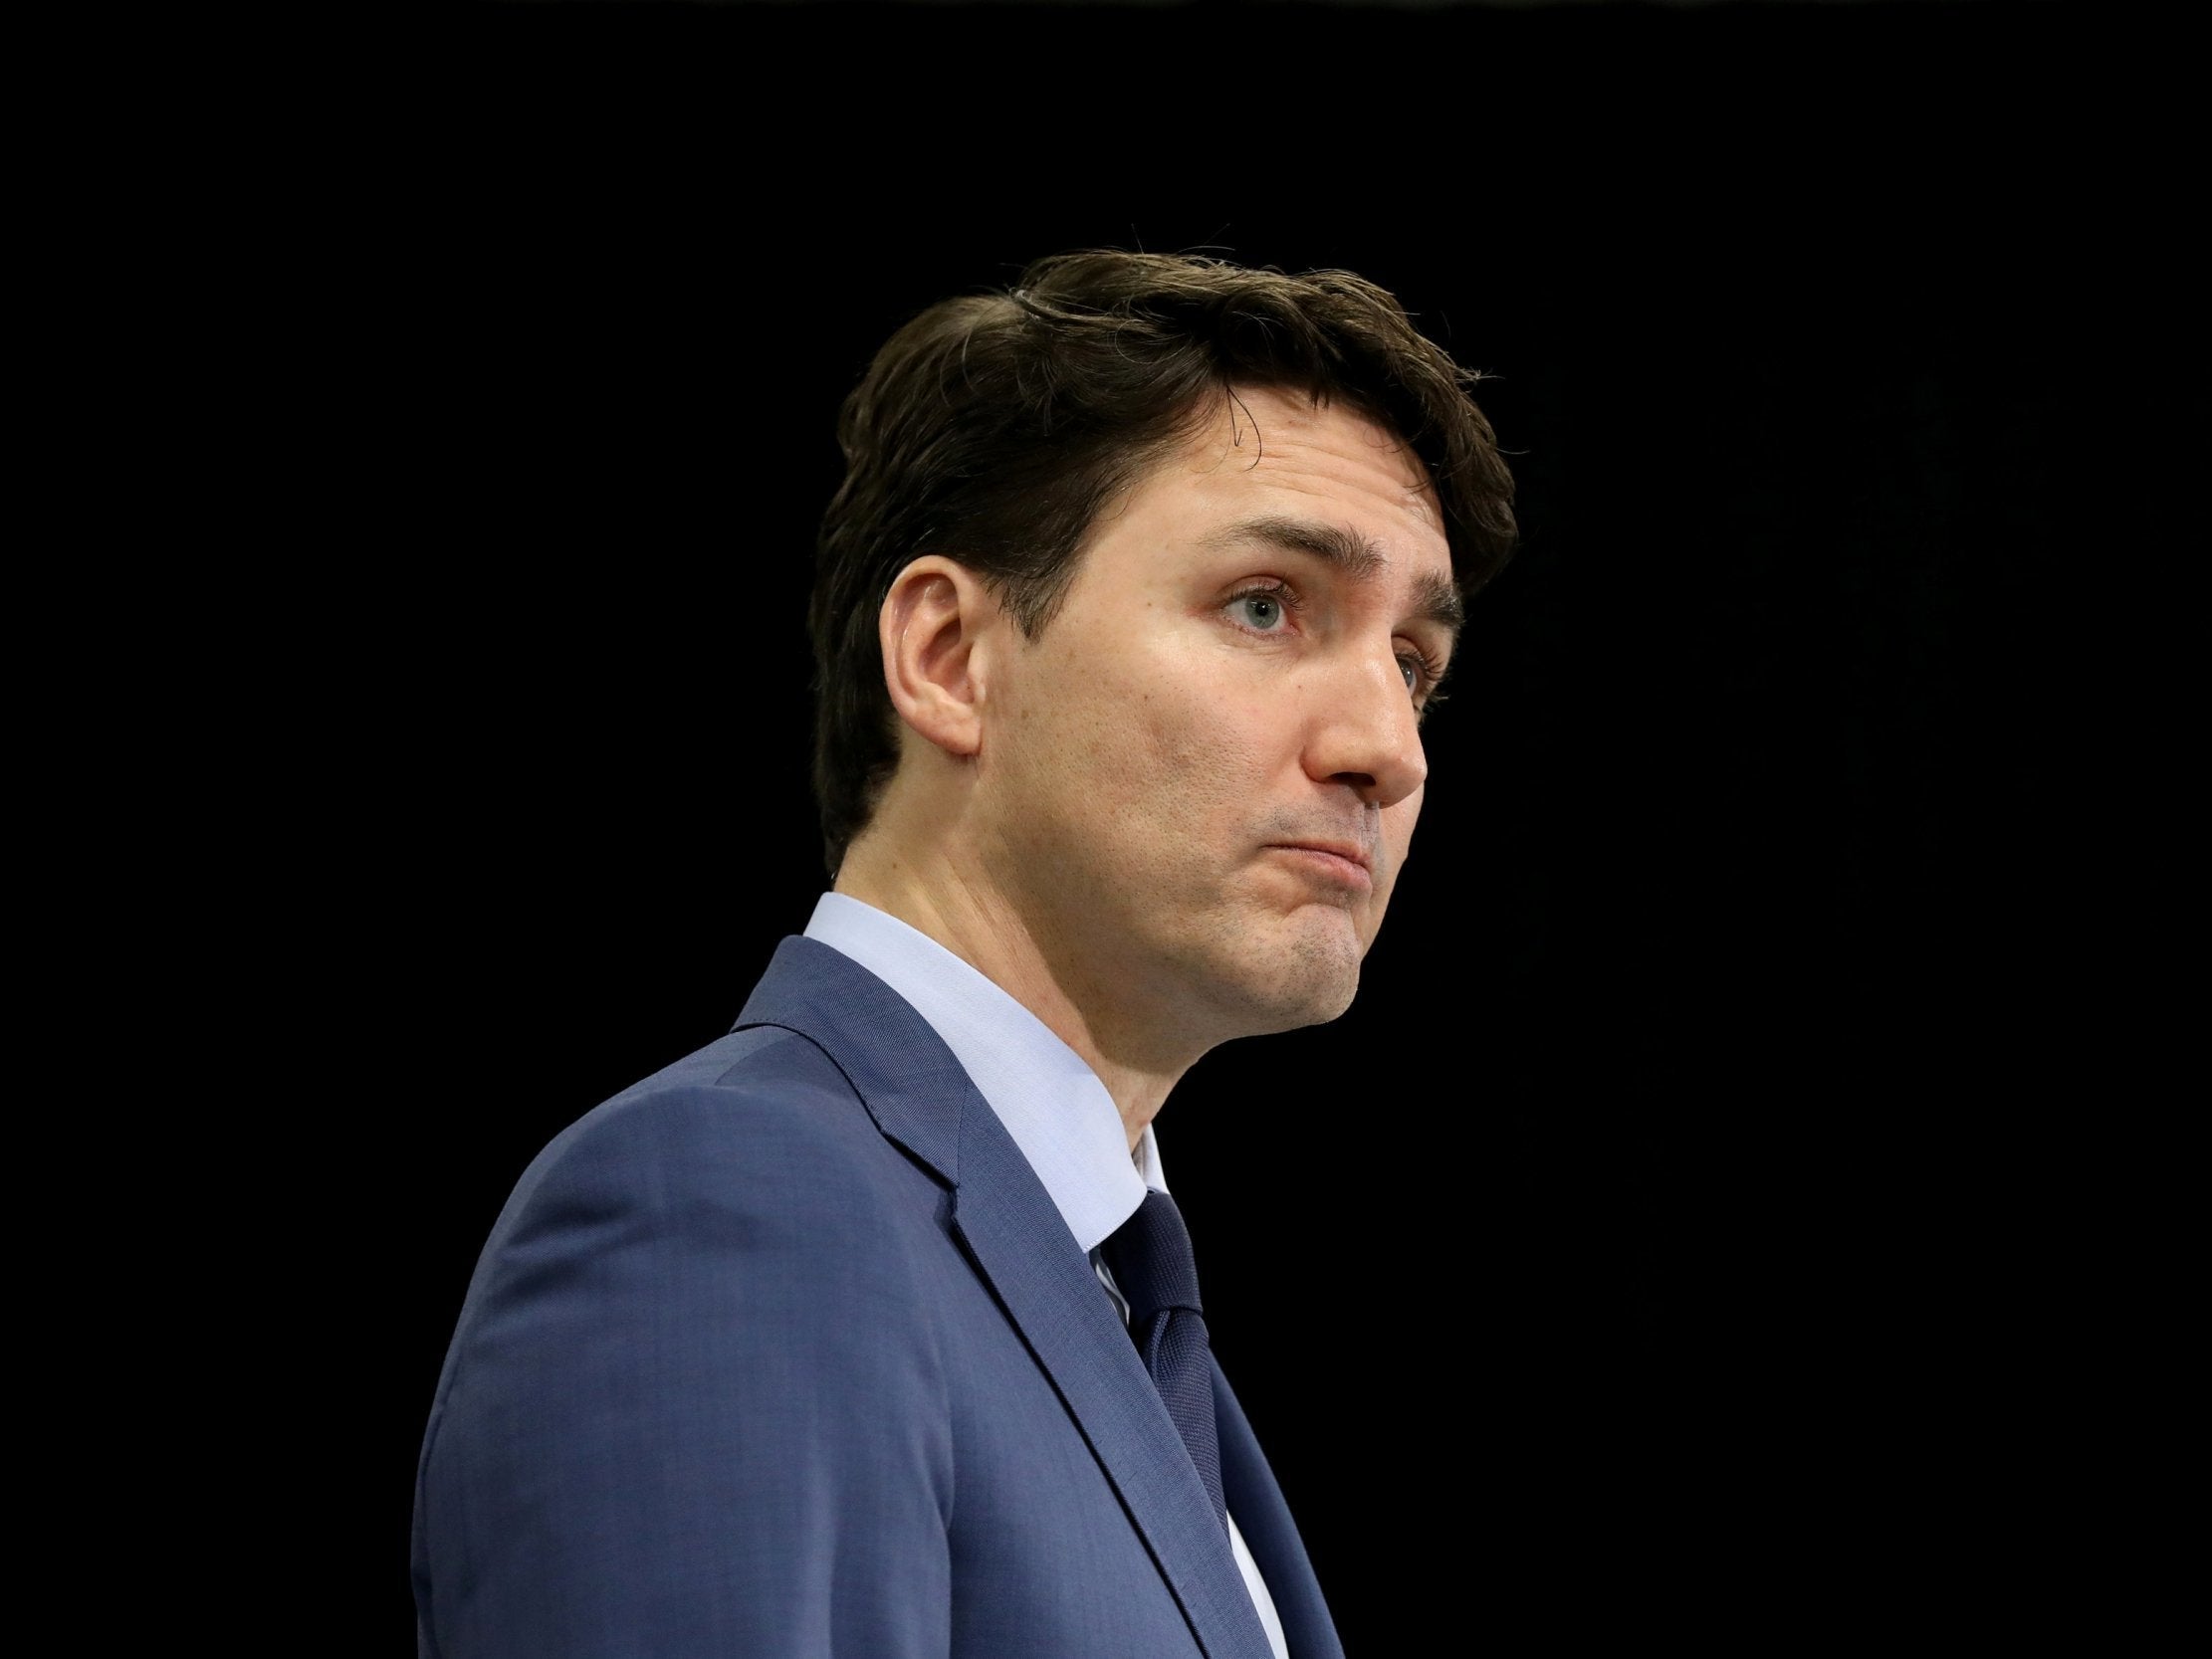 Canada to ban single-use plastics by 2021, Trudeau promises